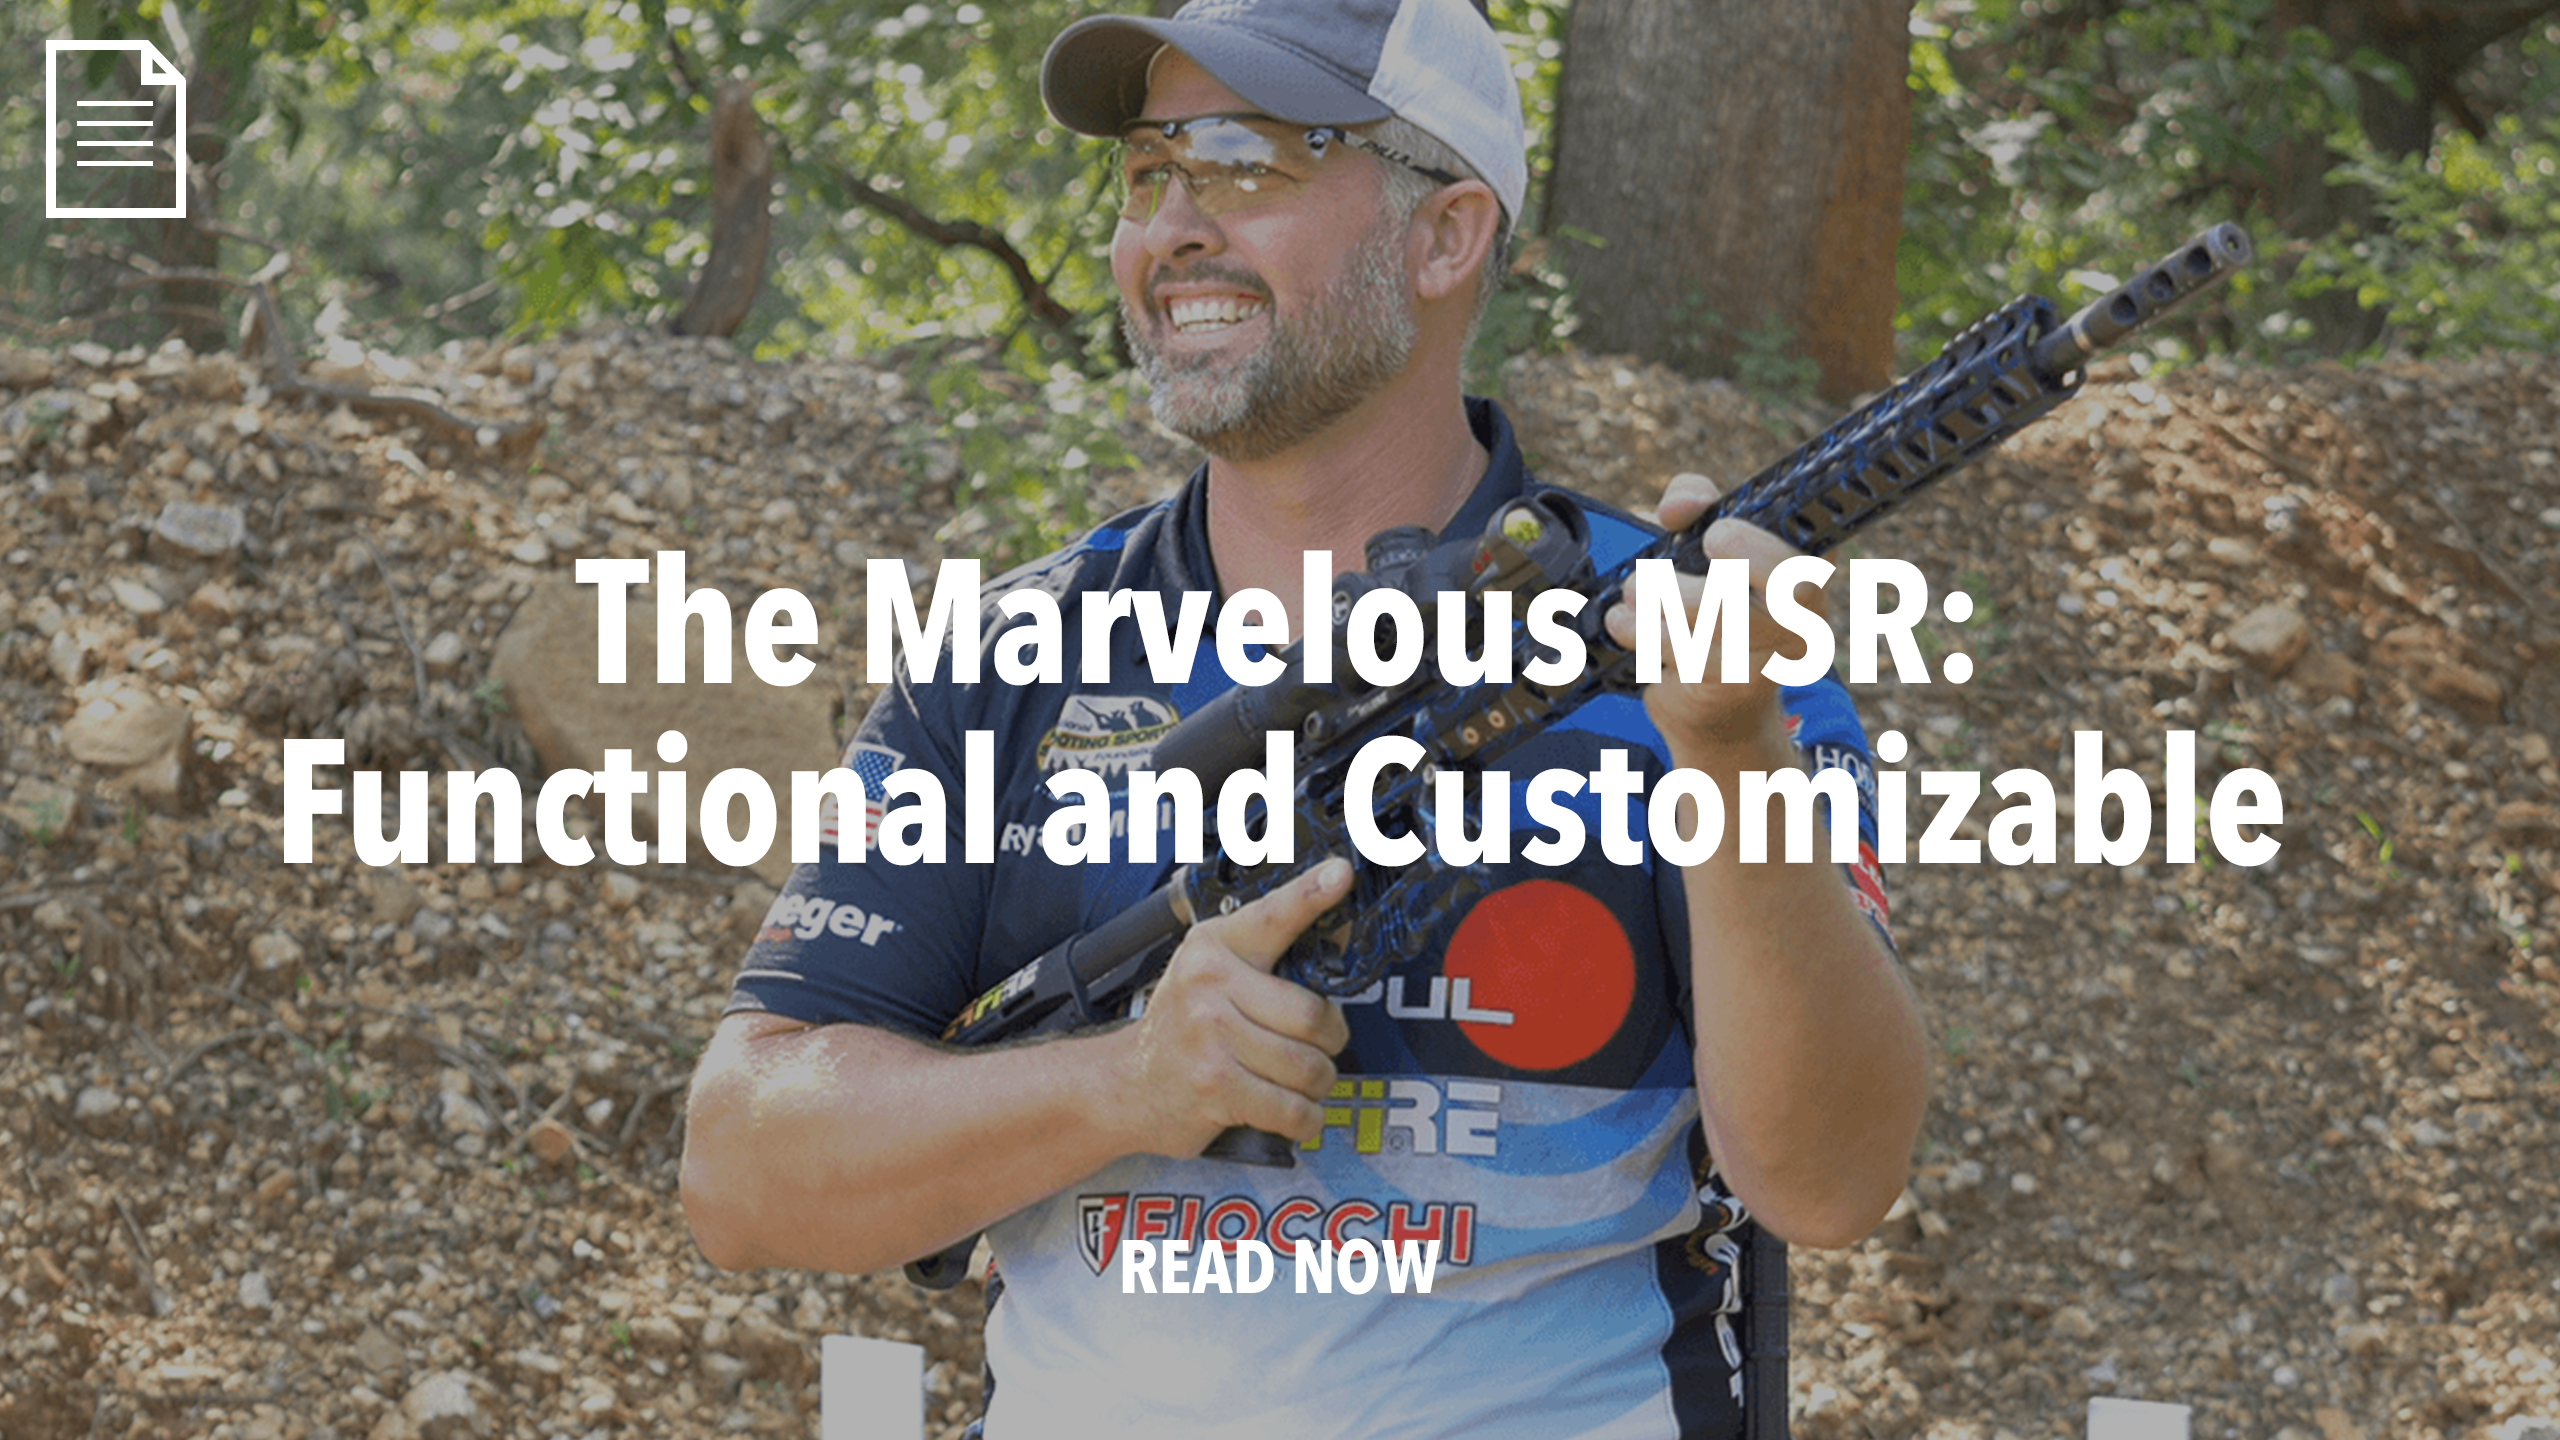 The Marvelous MSR: They’re Functional and Customizable